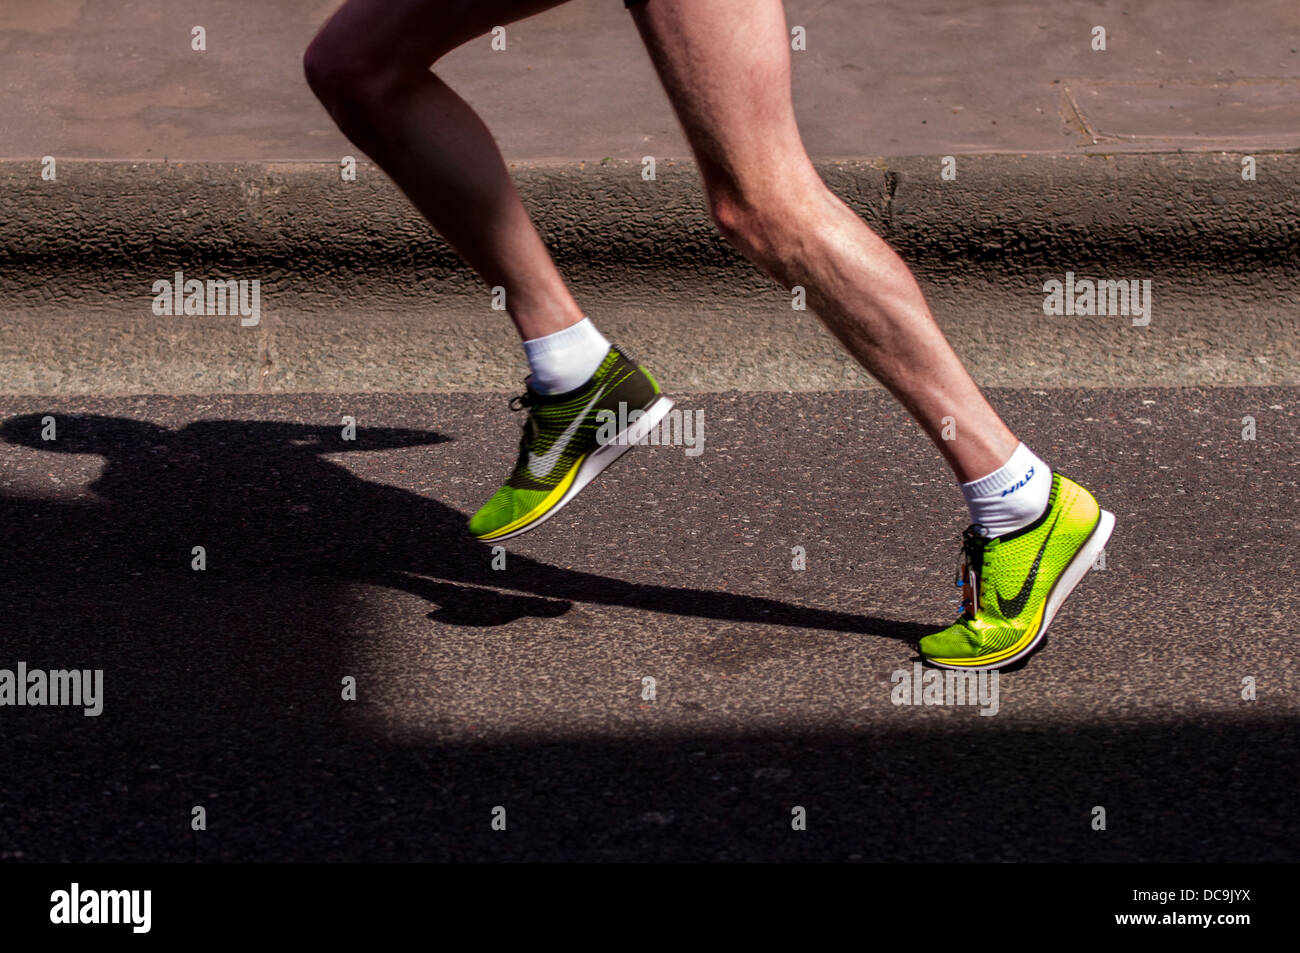 Athlete taking part in a race running by with shadow falling on to the road Stock Photo